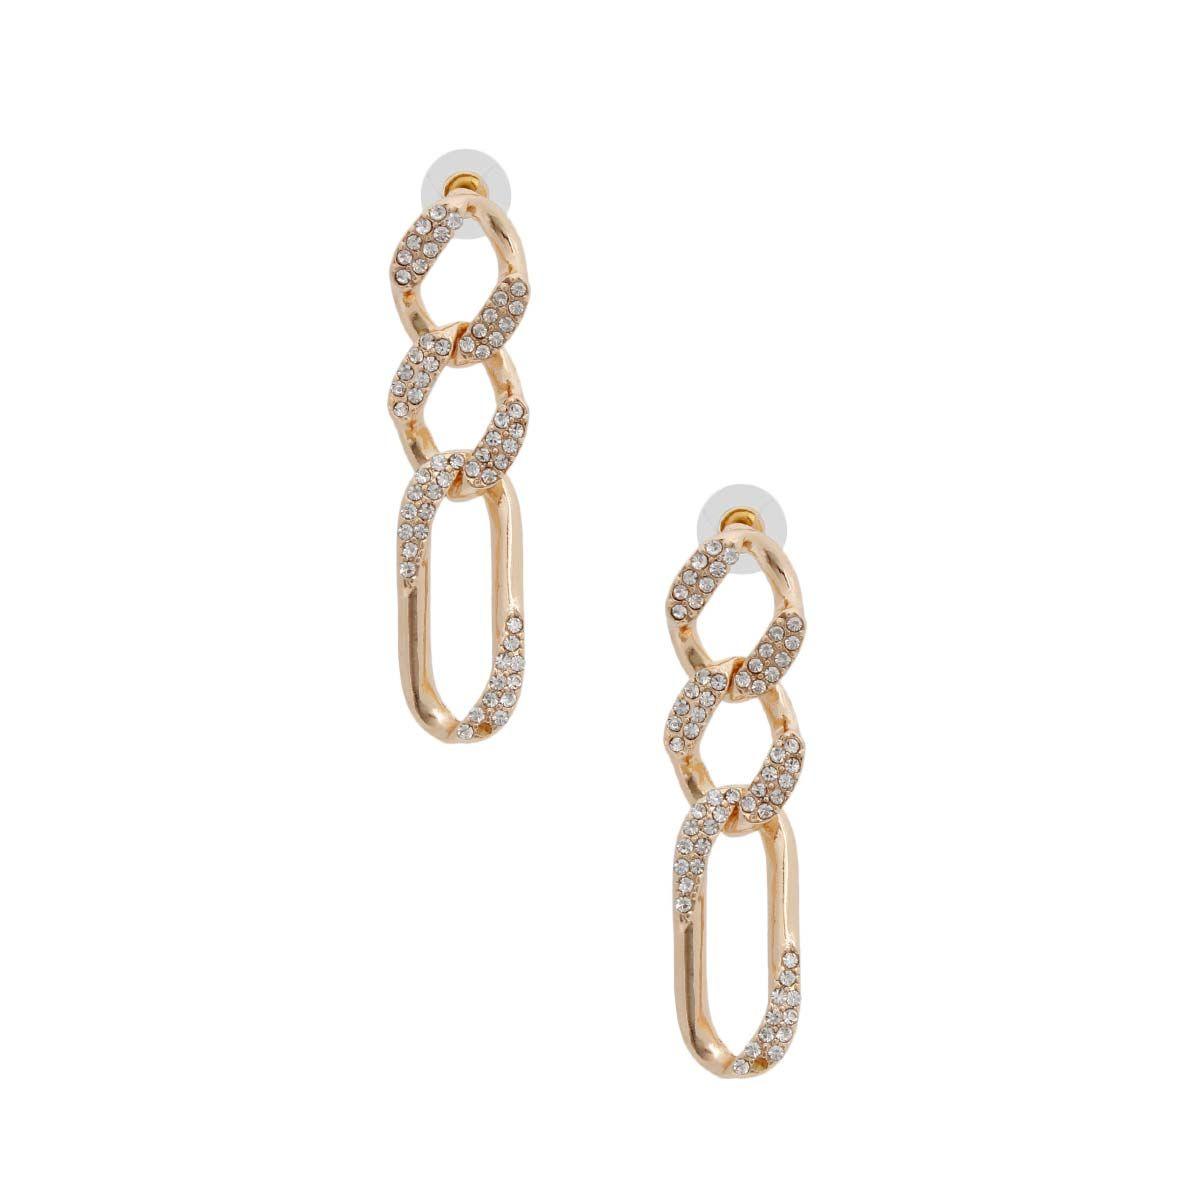 Gorgeous Rhinestone Chain Earrings Gold Plated - Shop Now!